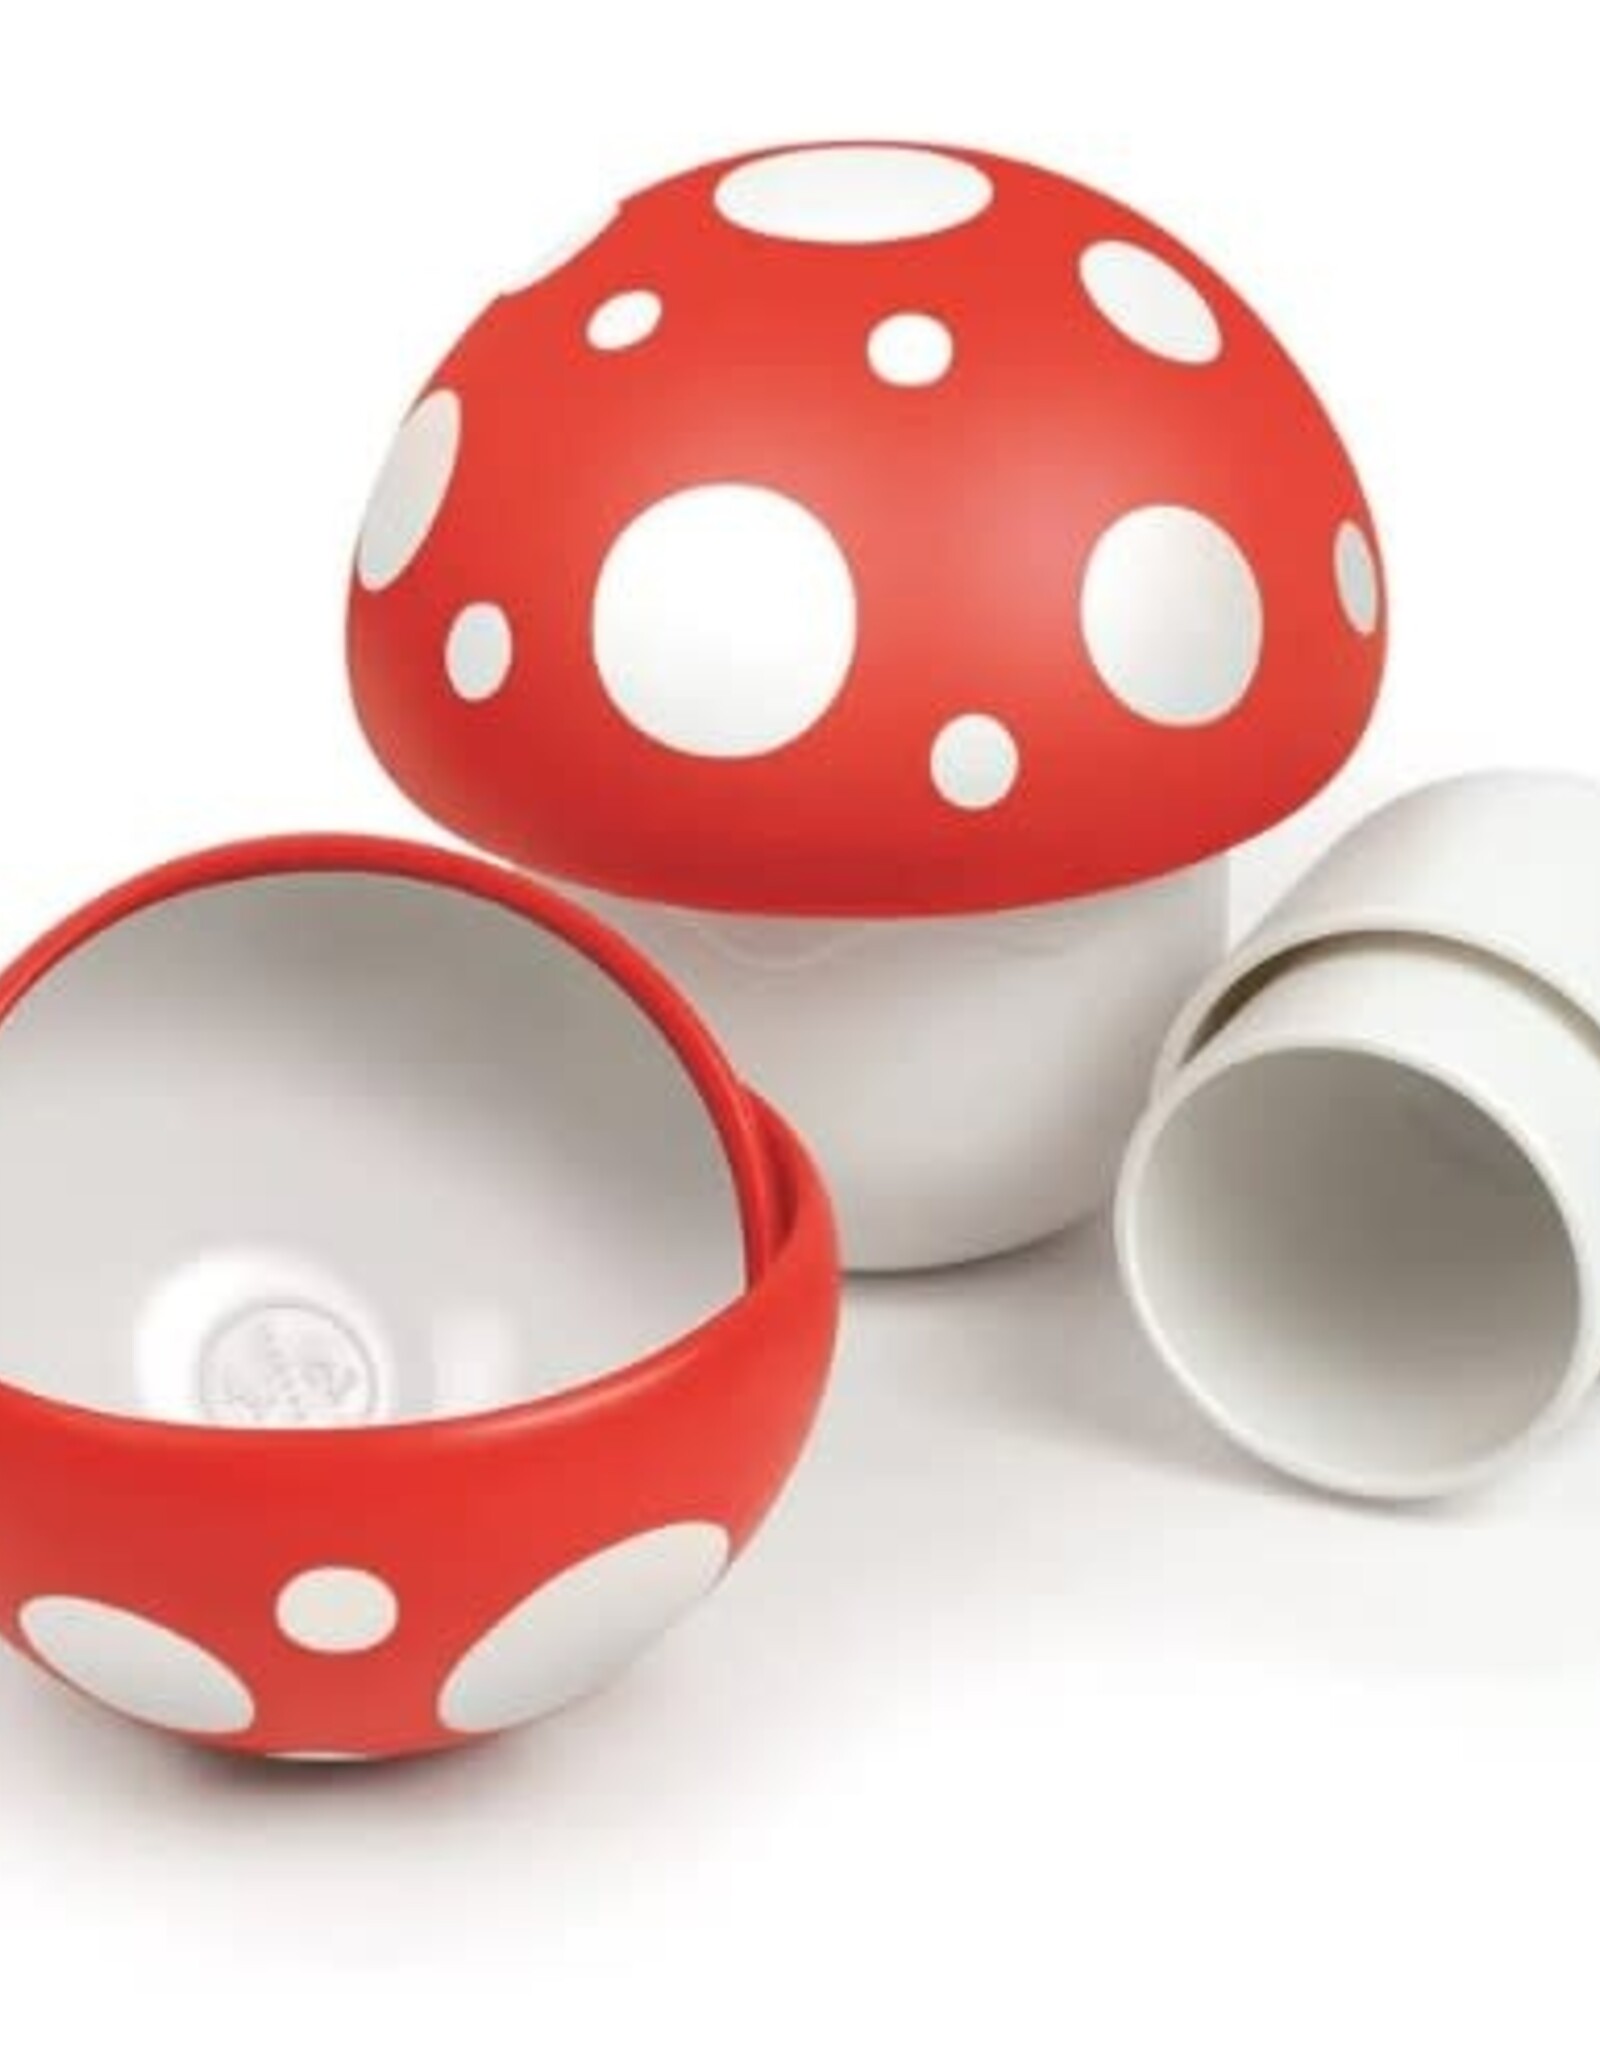 Fred & Friends MUSHROOM CUPS - MEASURING CUPS